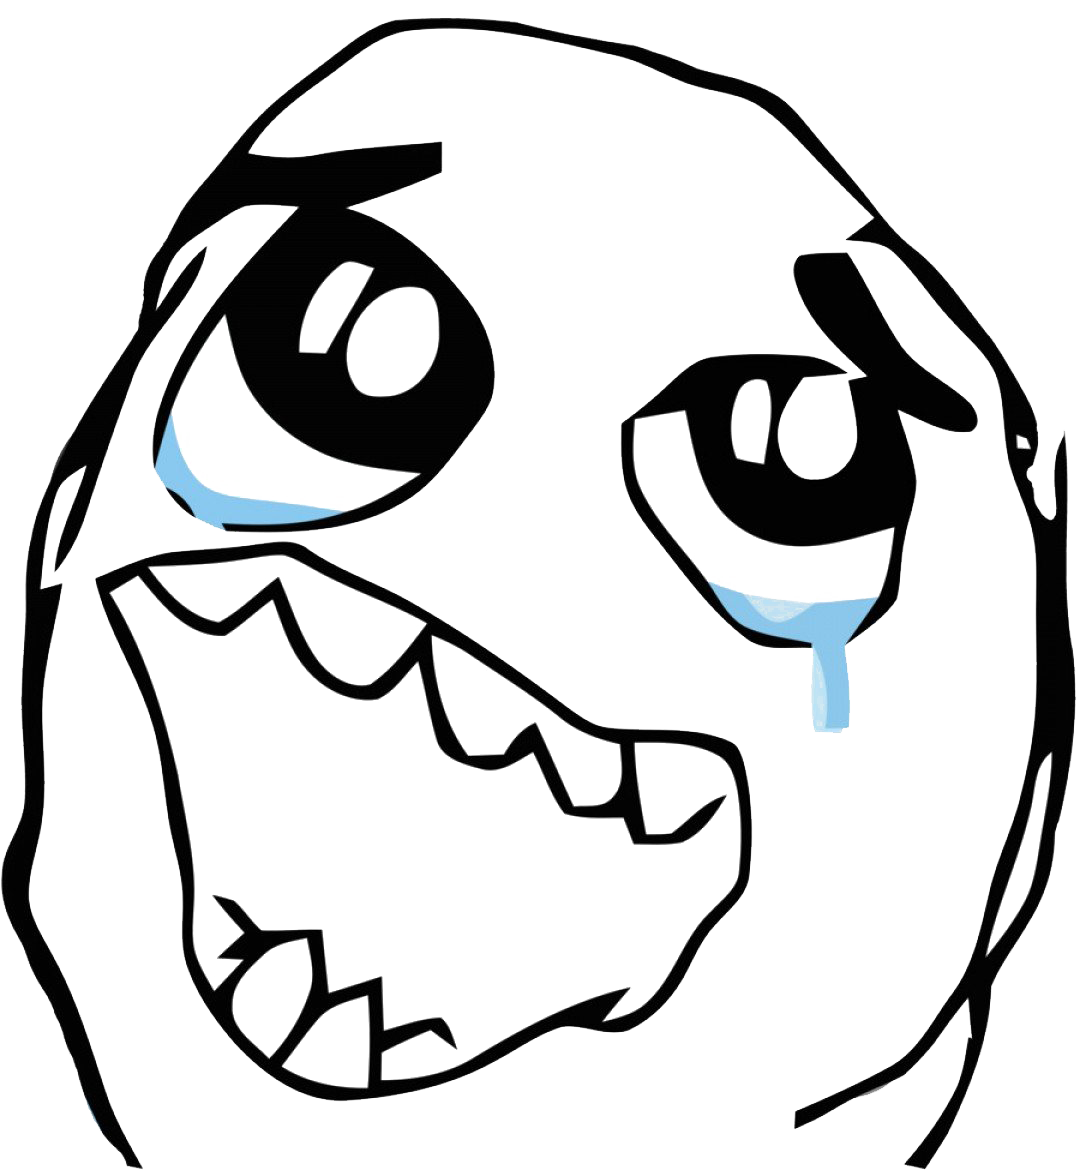 Trollface PNG Transparant Beeld